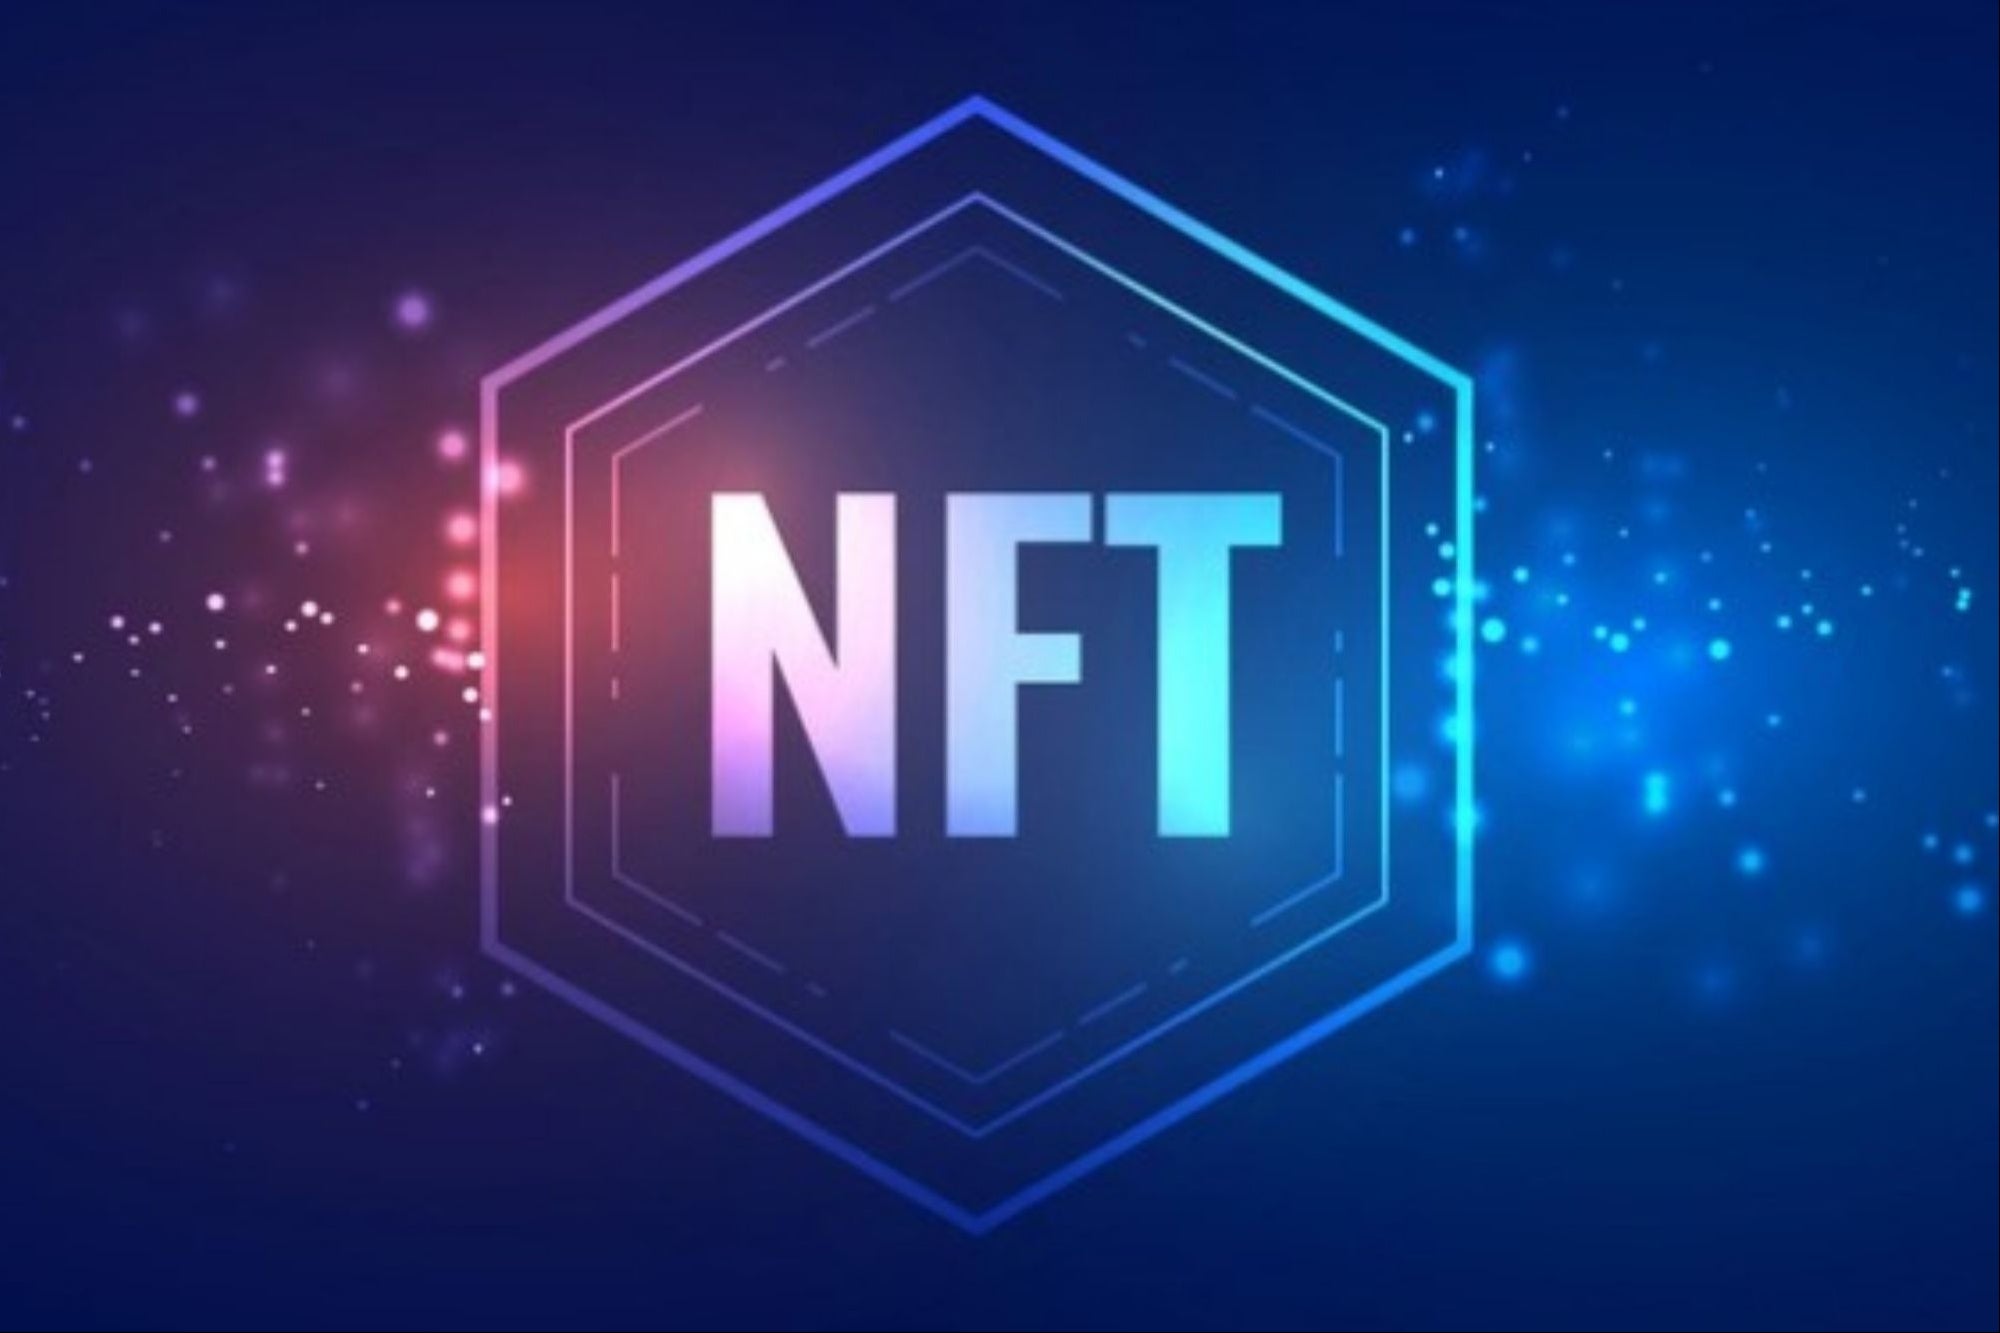 NFTS: Pros, Cons and Risks